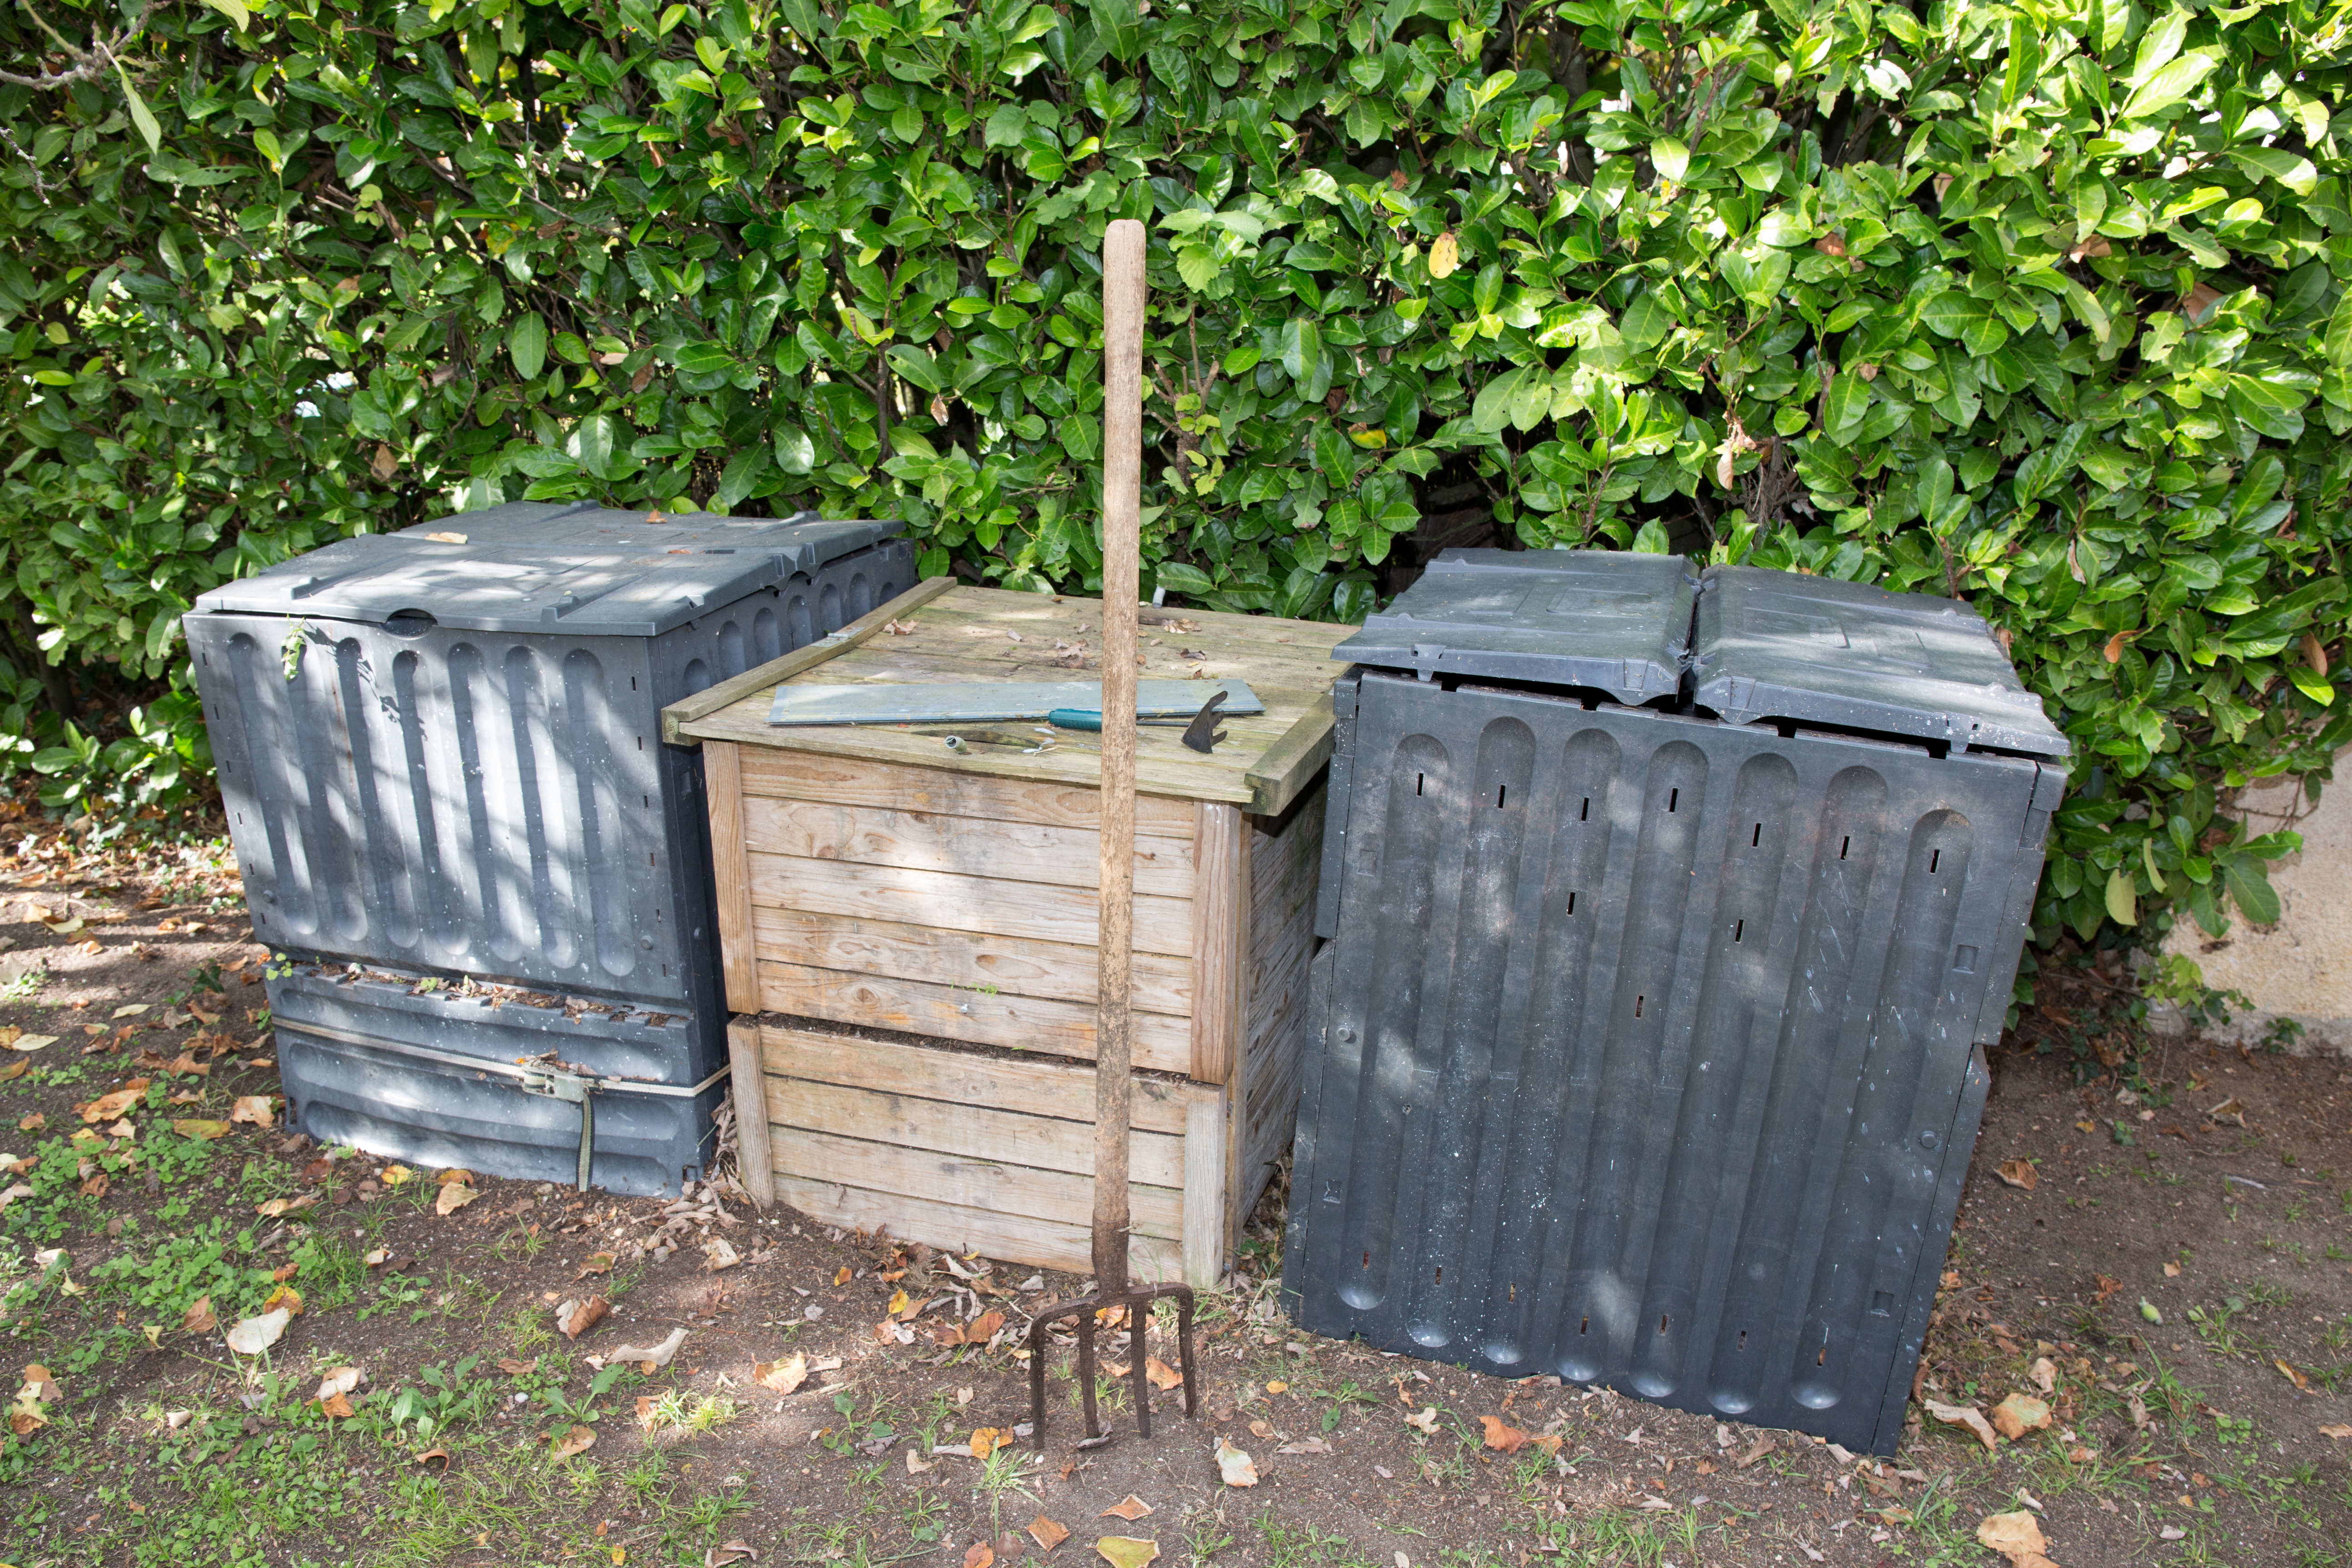 Three compost bins made with different materials side-by-side with a garden fork in the foreground and a hedge in the background